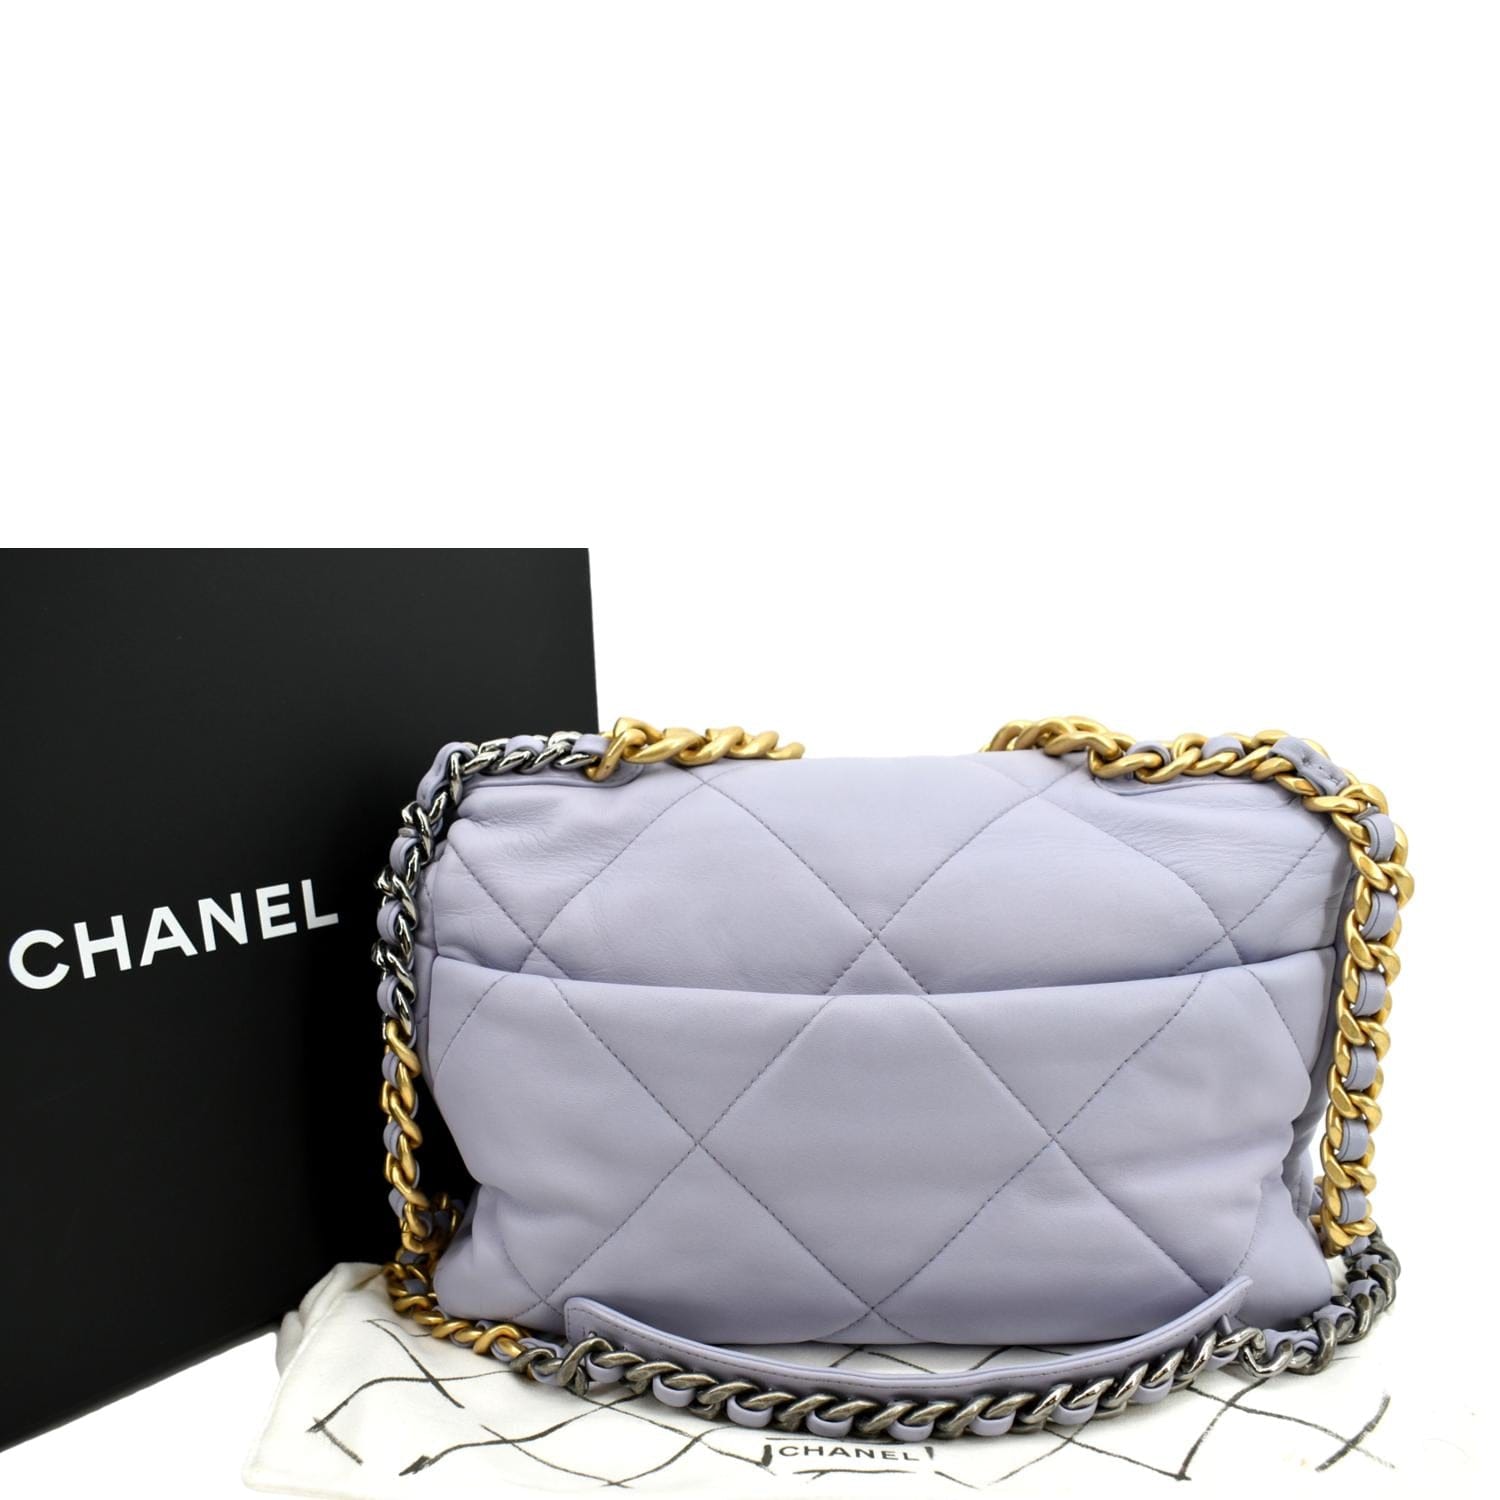 Chanel Lambskin Quilted Chanel 19 Shopping Bag Grey